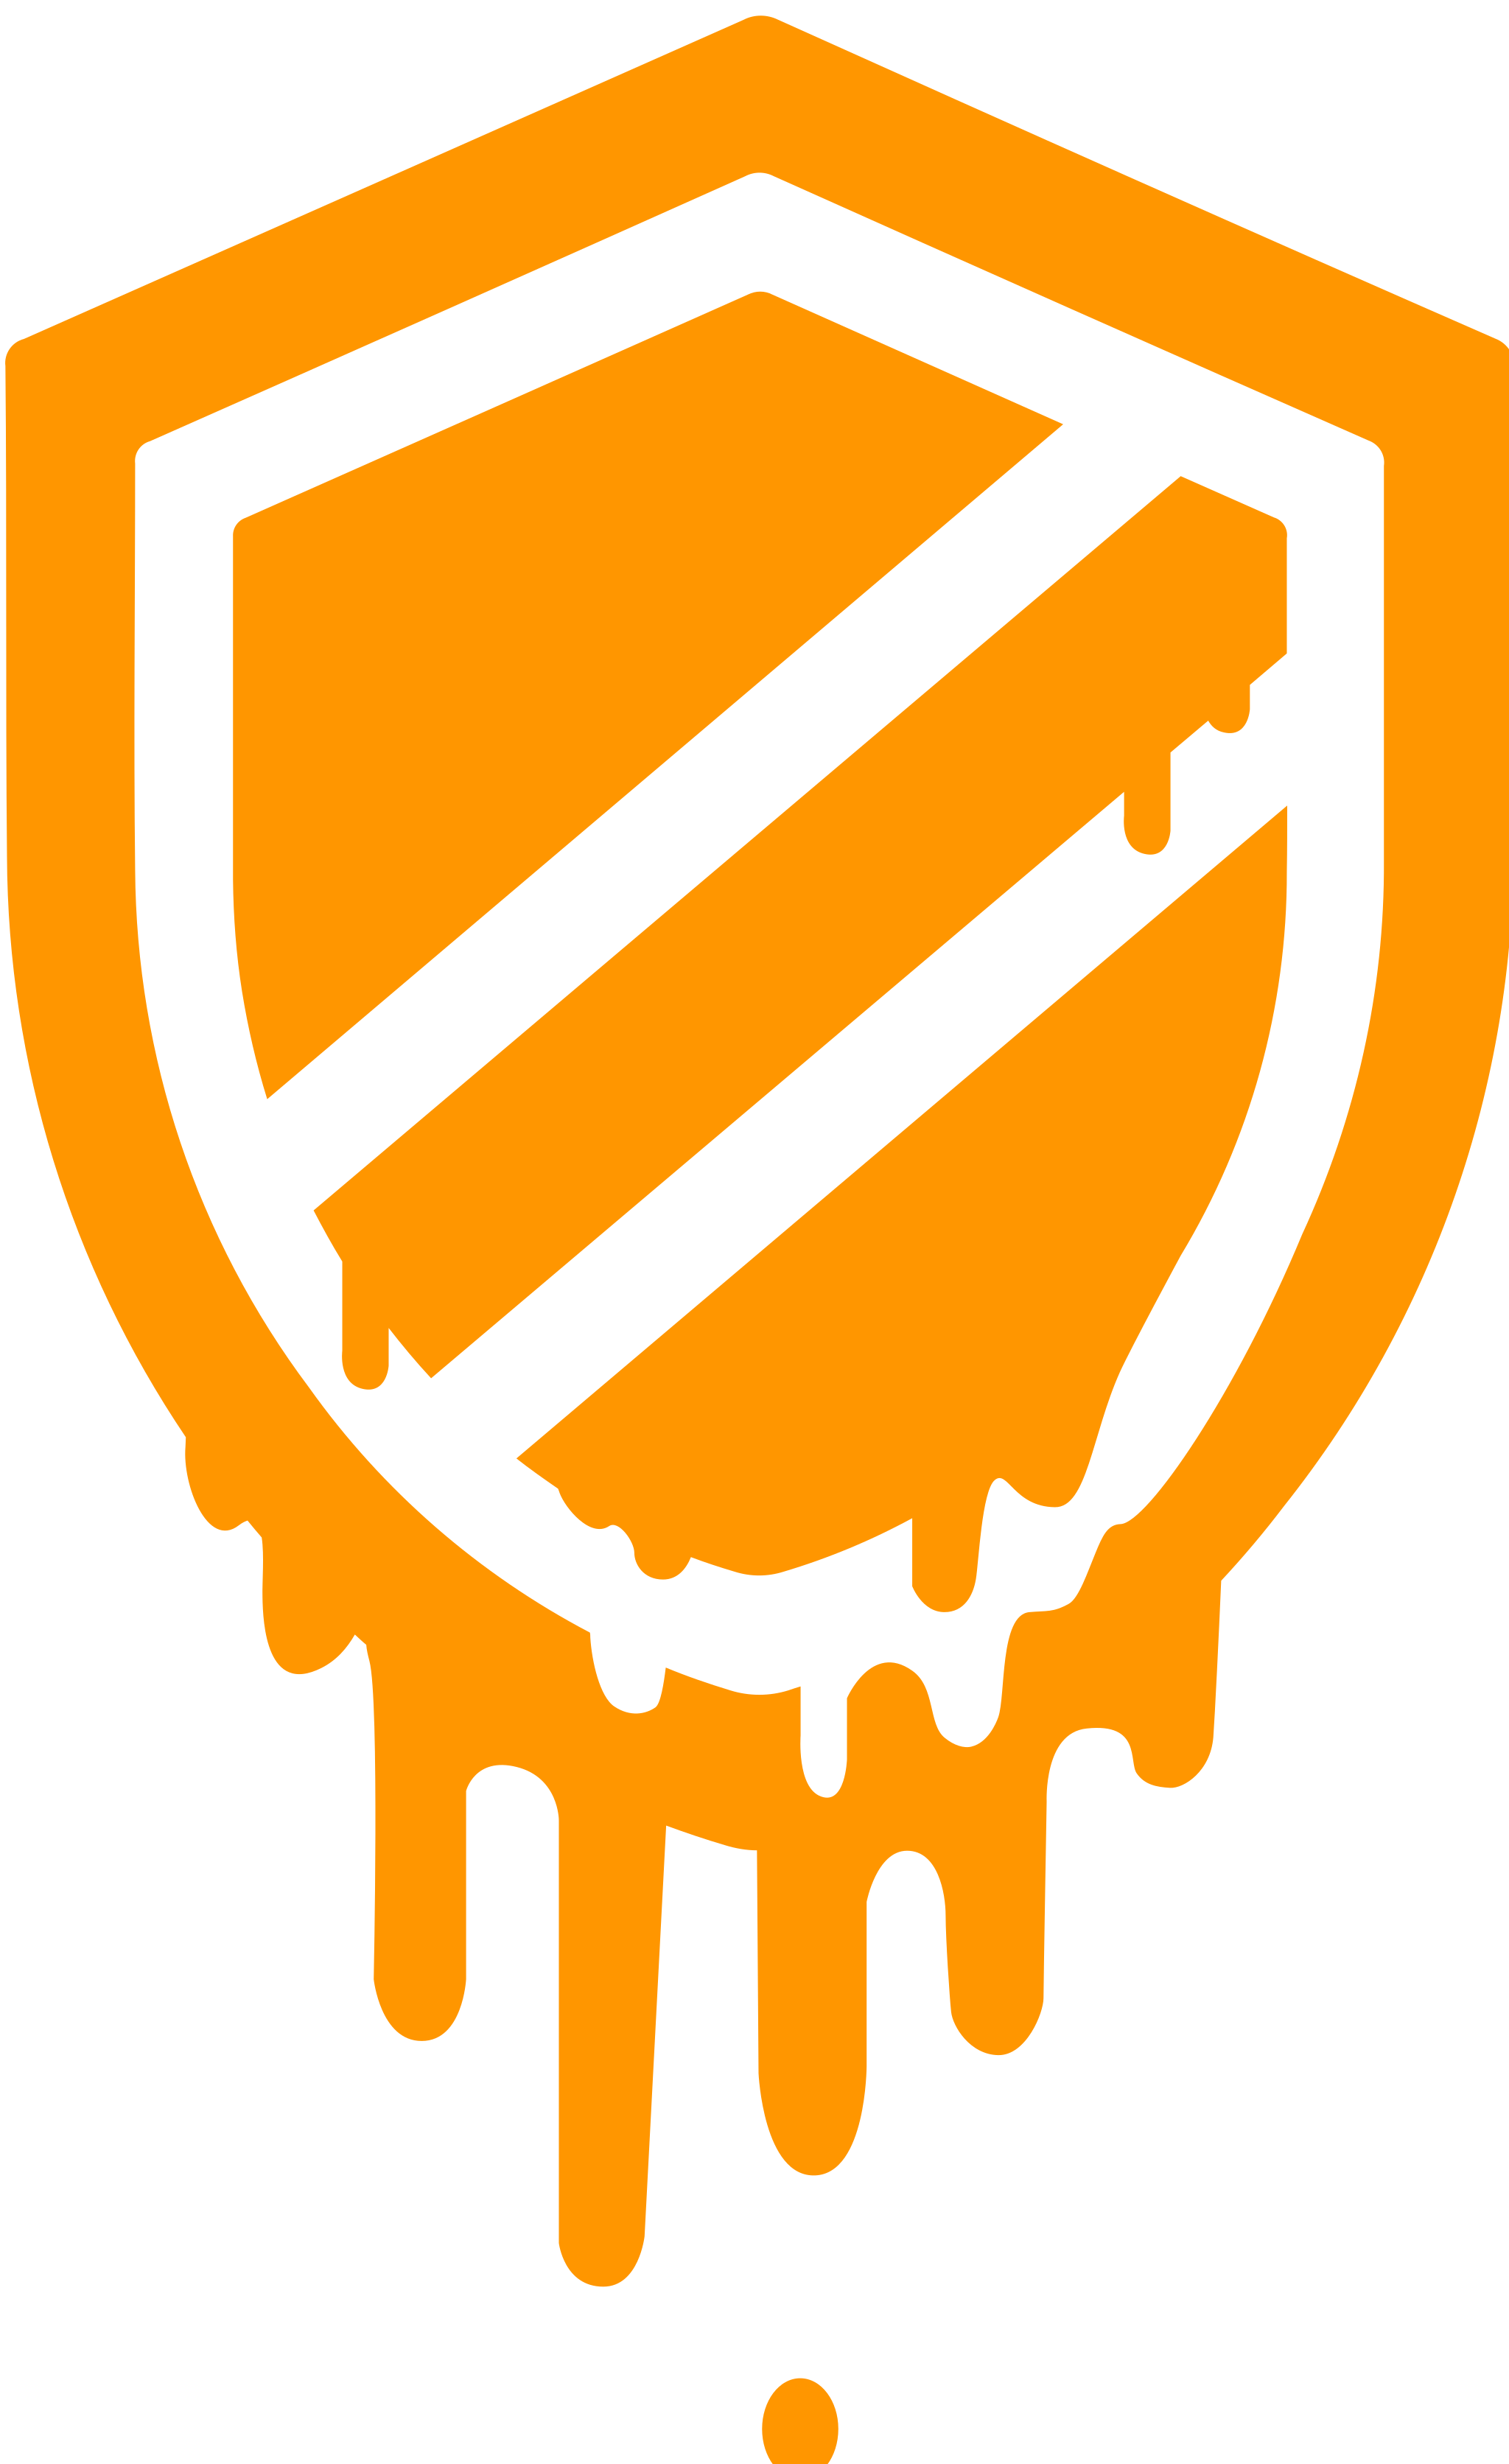 Meltdown And Spectre